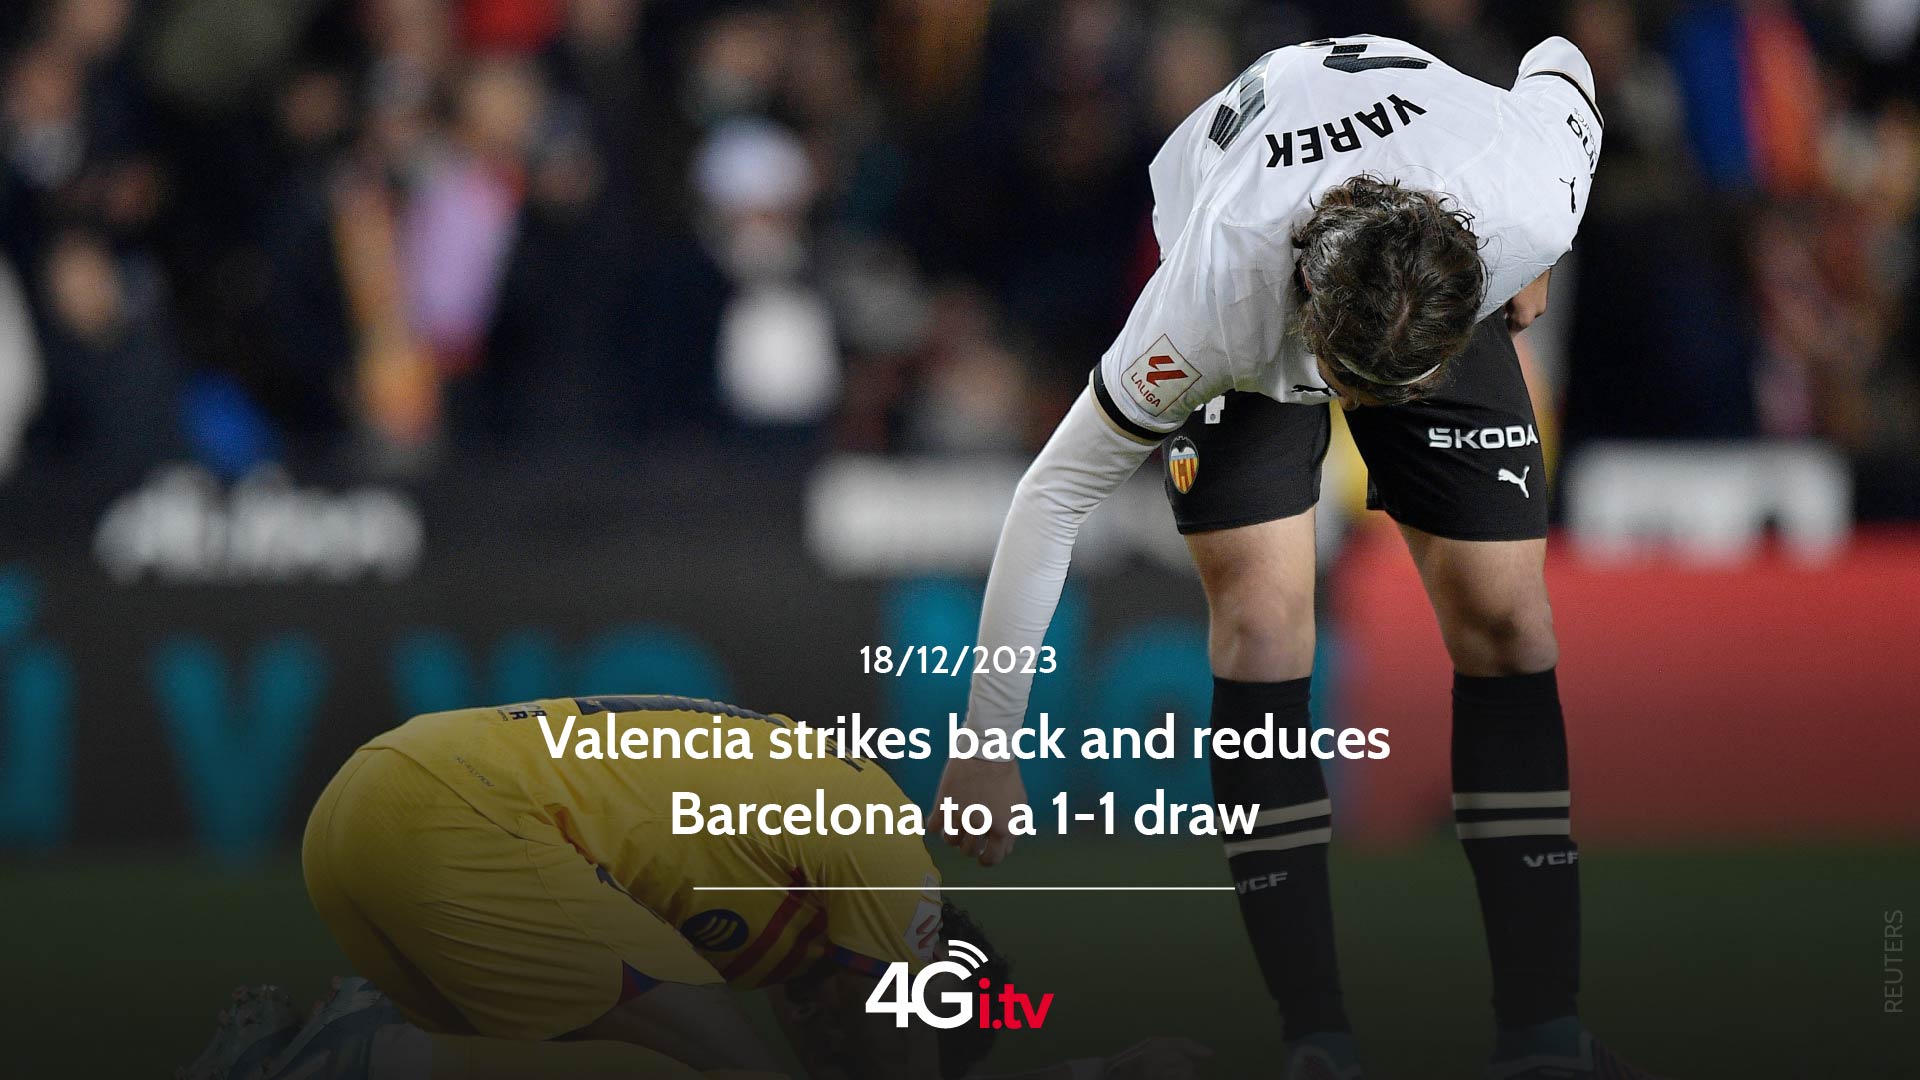 Read more about the article Valencia strikes back and reduces Barcelona to a 1-1 draw